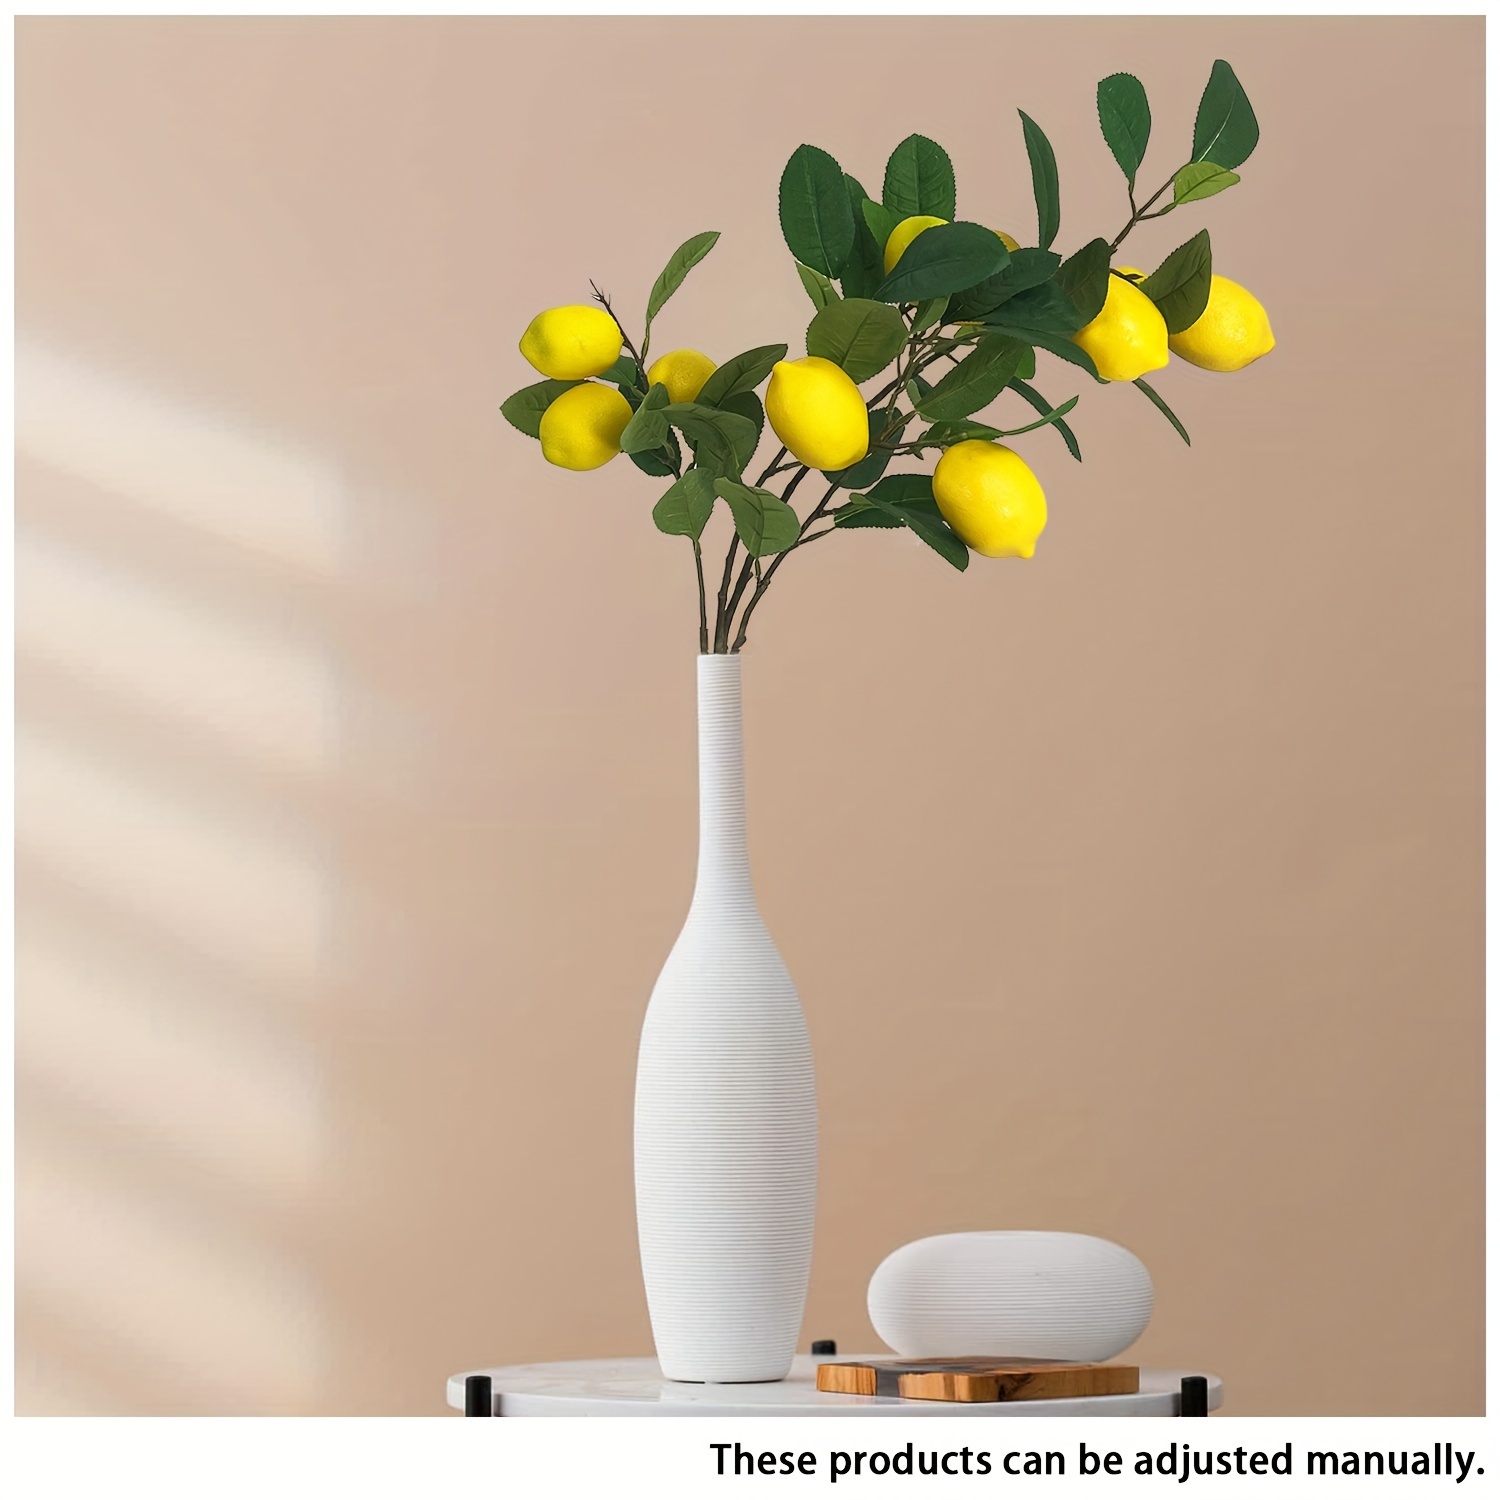 

2/3pcs Artificial Lemon Branches, Perfect For Indoor And Outdoor Decoration In Homes, Hotels, Weddings, Festivals, And Parties